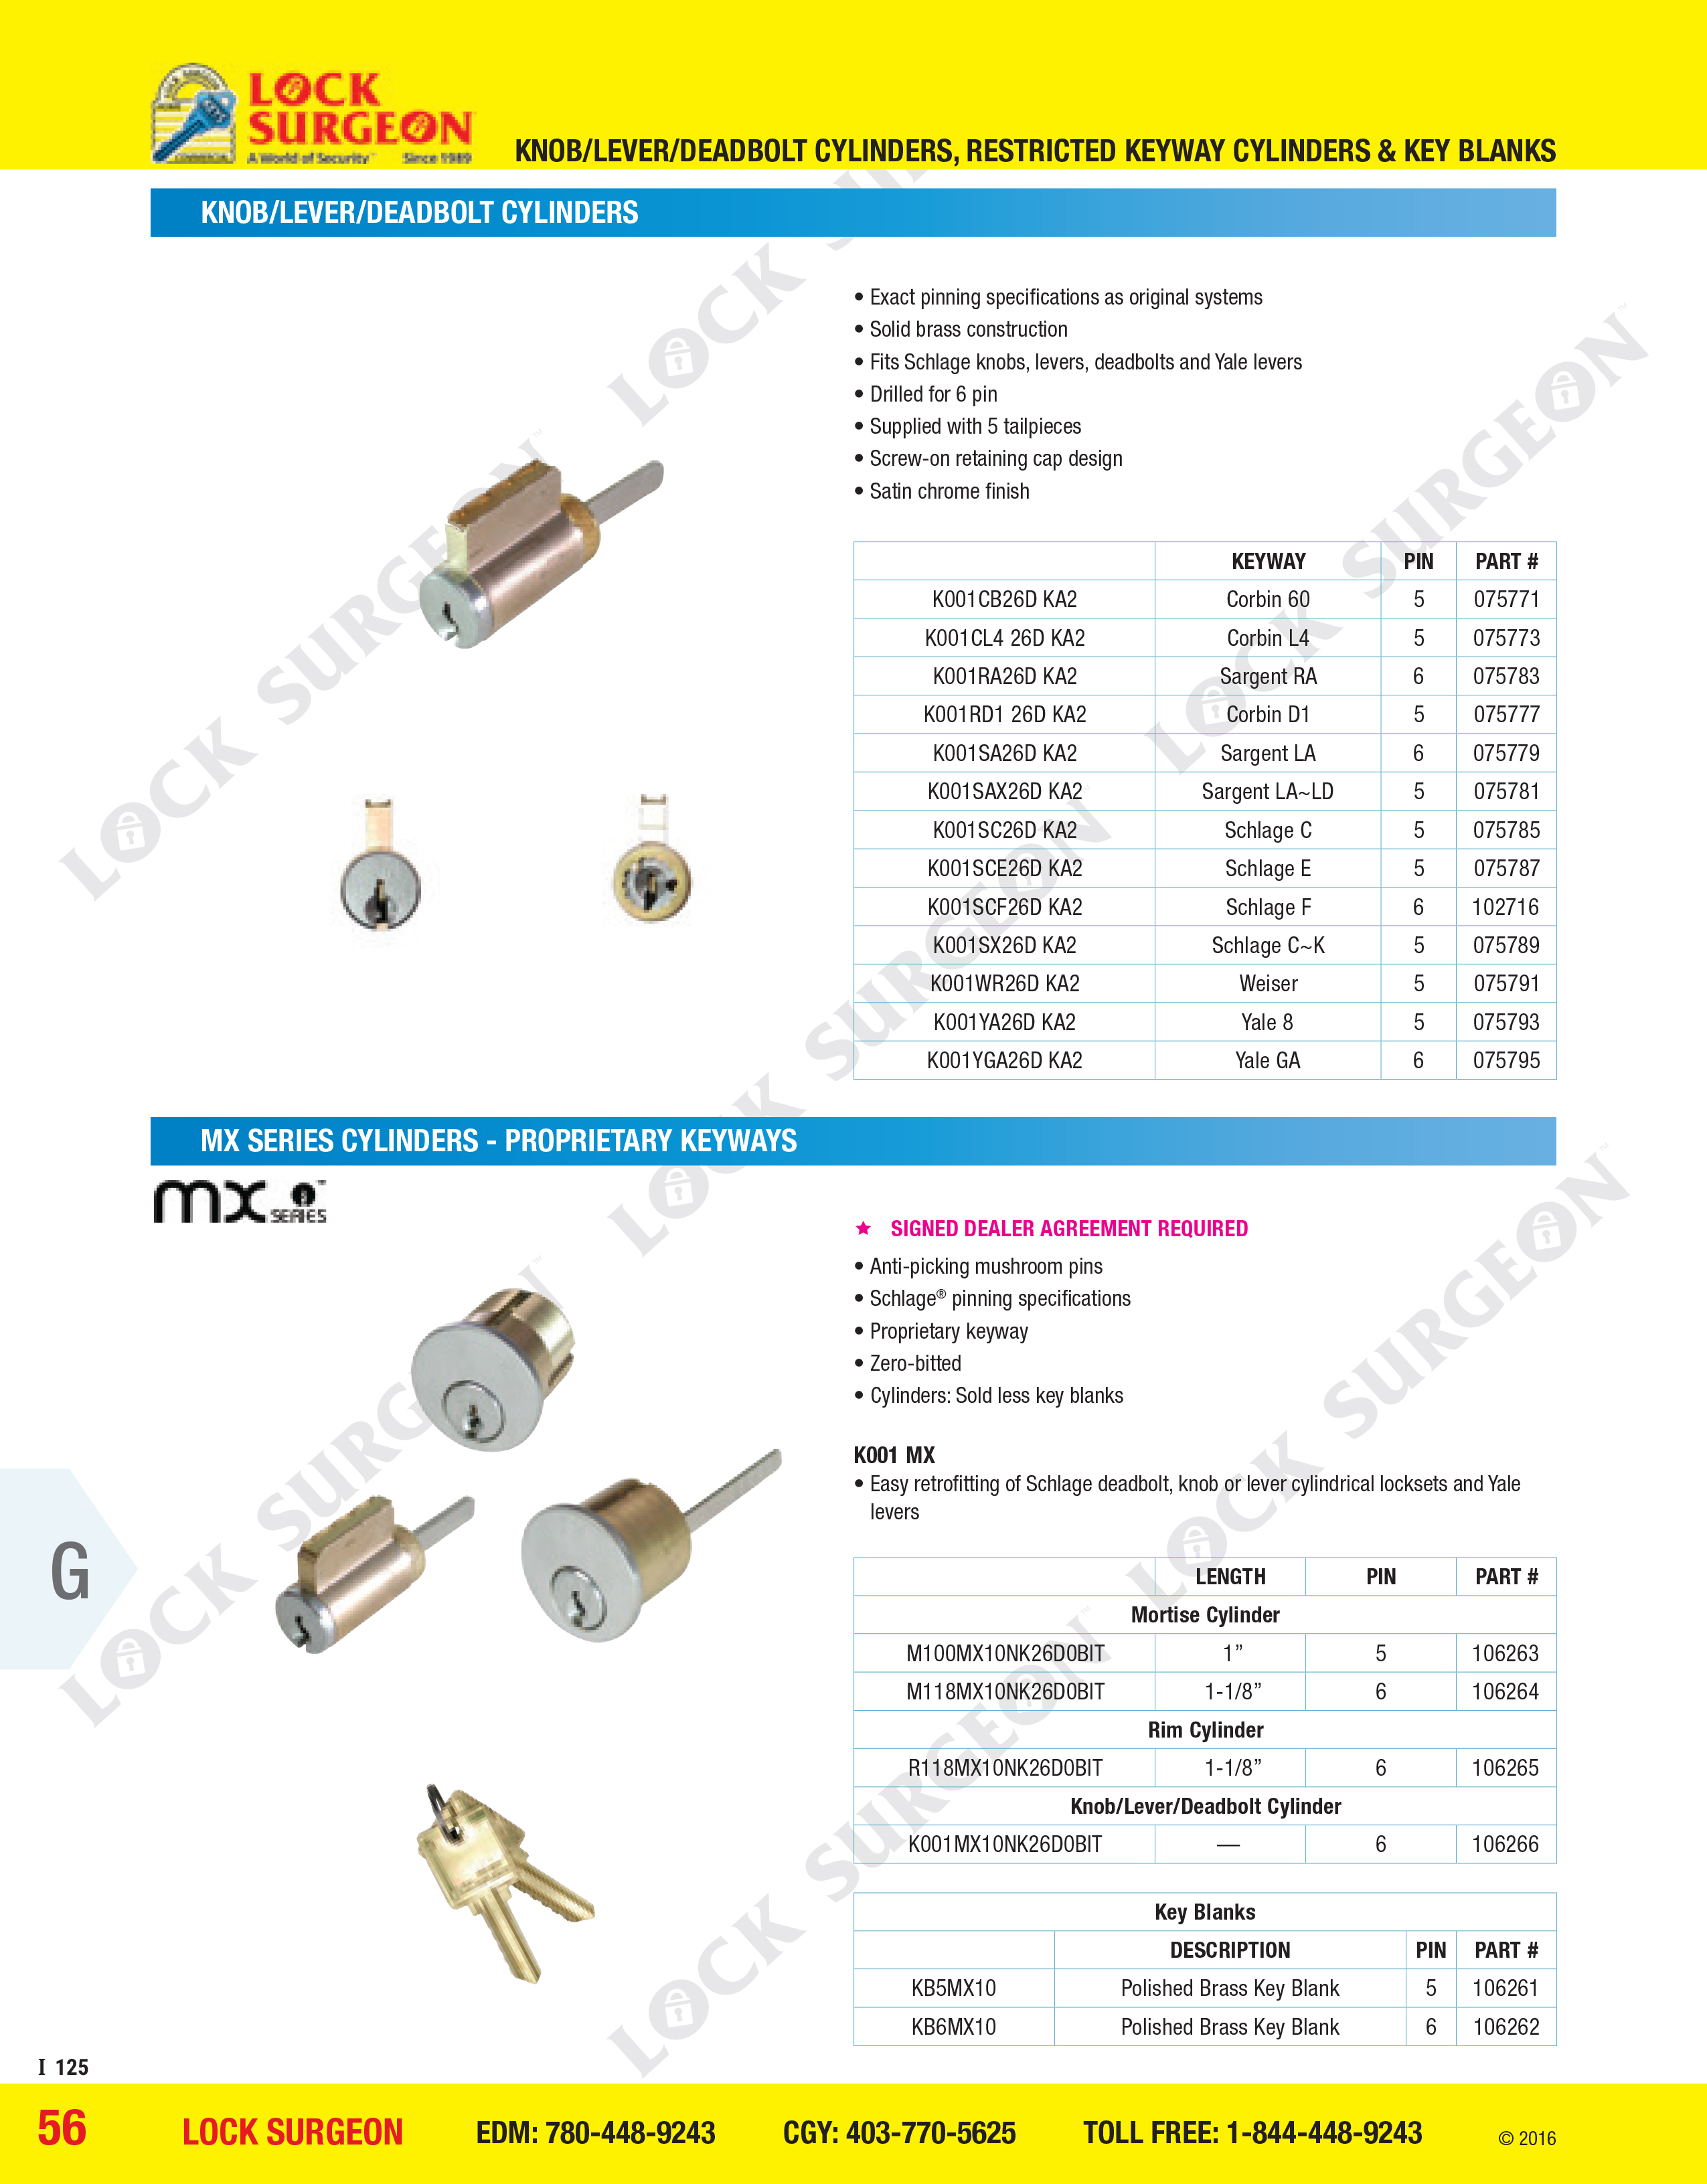 Acheson GMS knob lever deadbolt cylinders restricted keyway cylinders and key blanks.